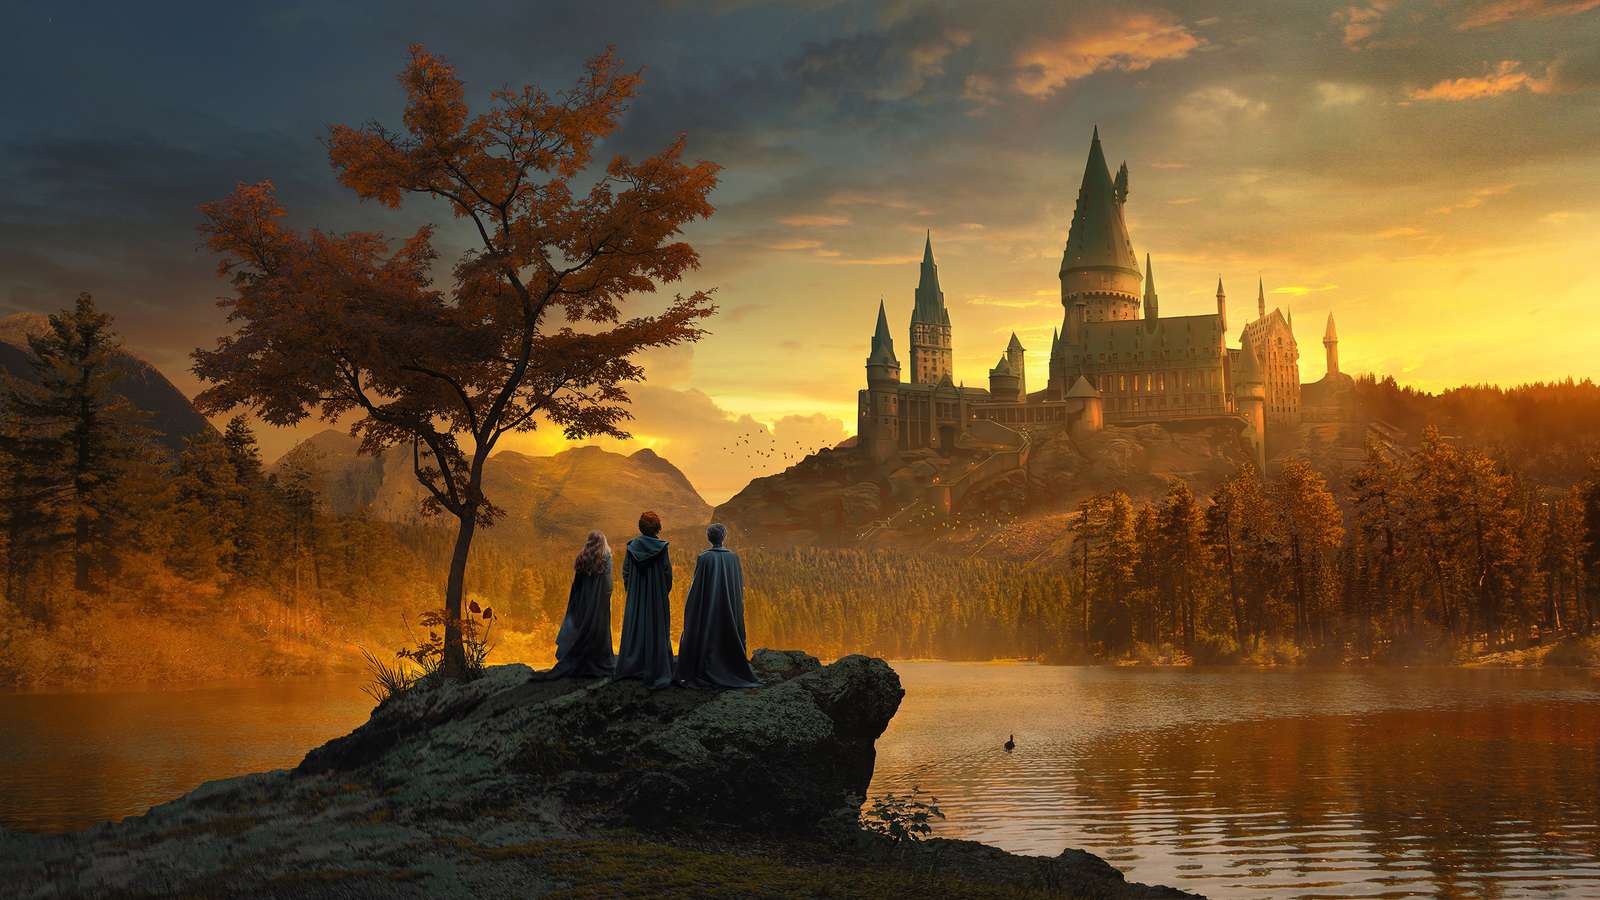 Castello di Harry Potter puzzle online from photo